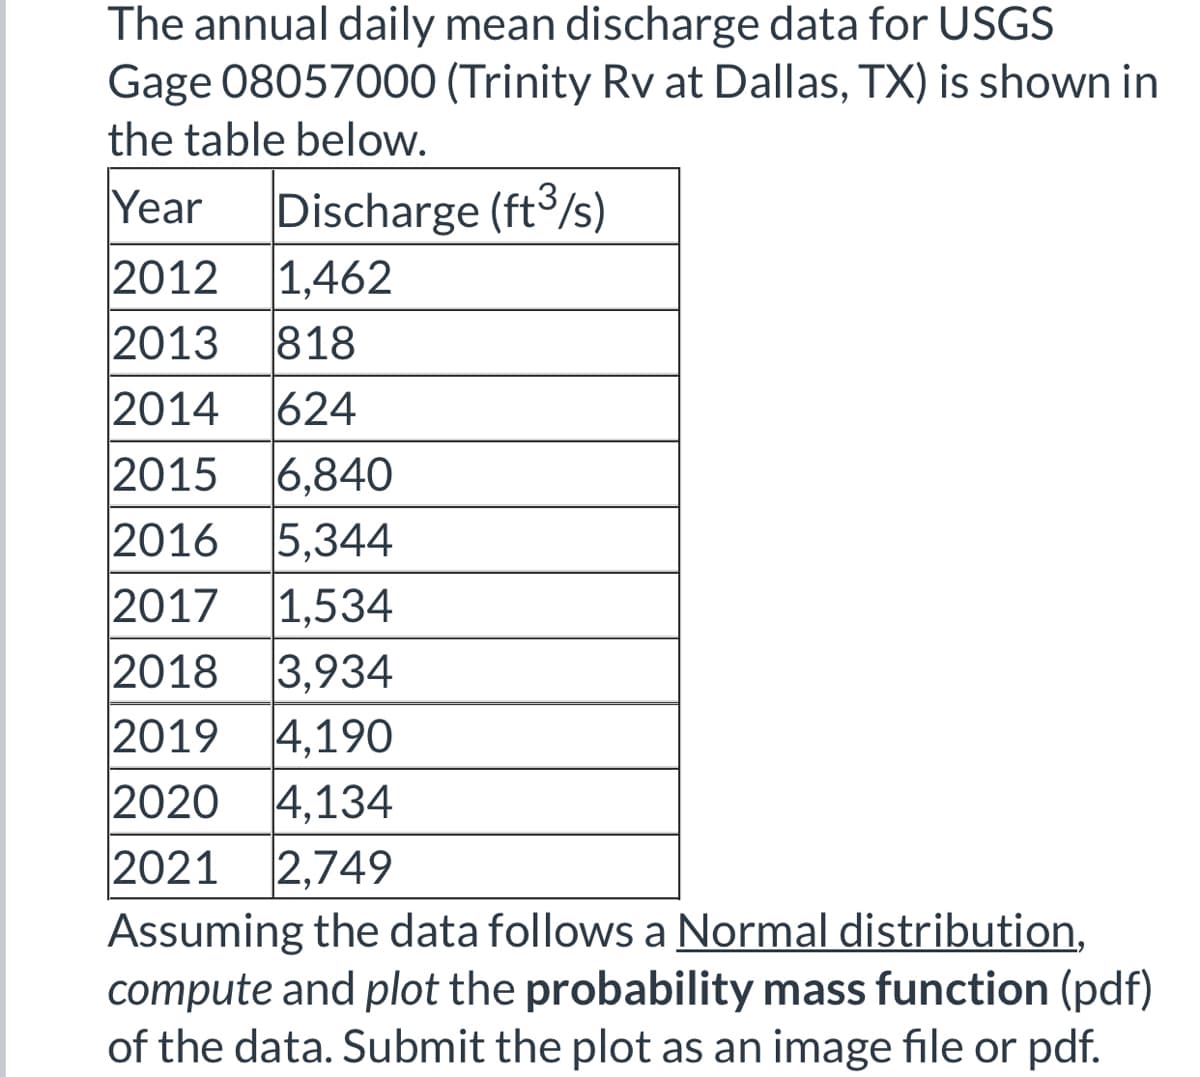 The annual daily mean discharge data for USGS
Gage 08057000 (Trinity Rv at Dallas, TX) is shown in
the table below.
Year Discharge (ft³/s)
2012 1,462
2013 818
2014 624
2015 6,840
2016 5,344
2017 1,534
2018 3,934
2019 4,190
2020 4,134
2021 2,749
Assuming the data follows a Normal distribution,
compute and plot the probability mass function (pdf)
of the data. Submit the plot as an image file or pdf.